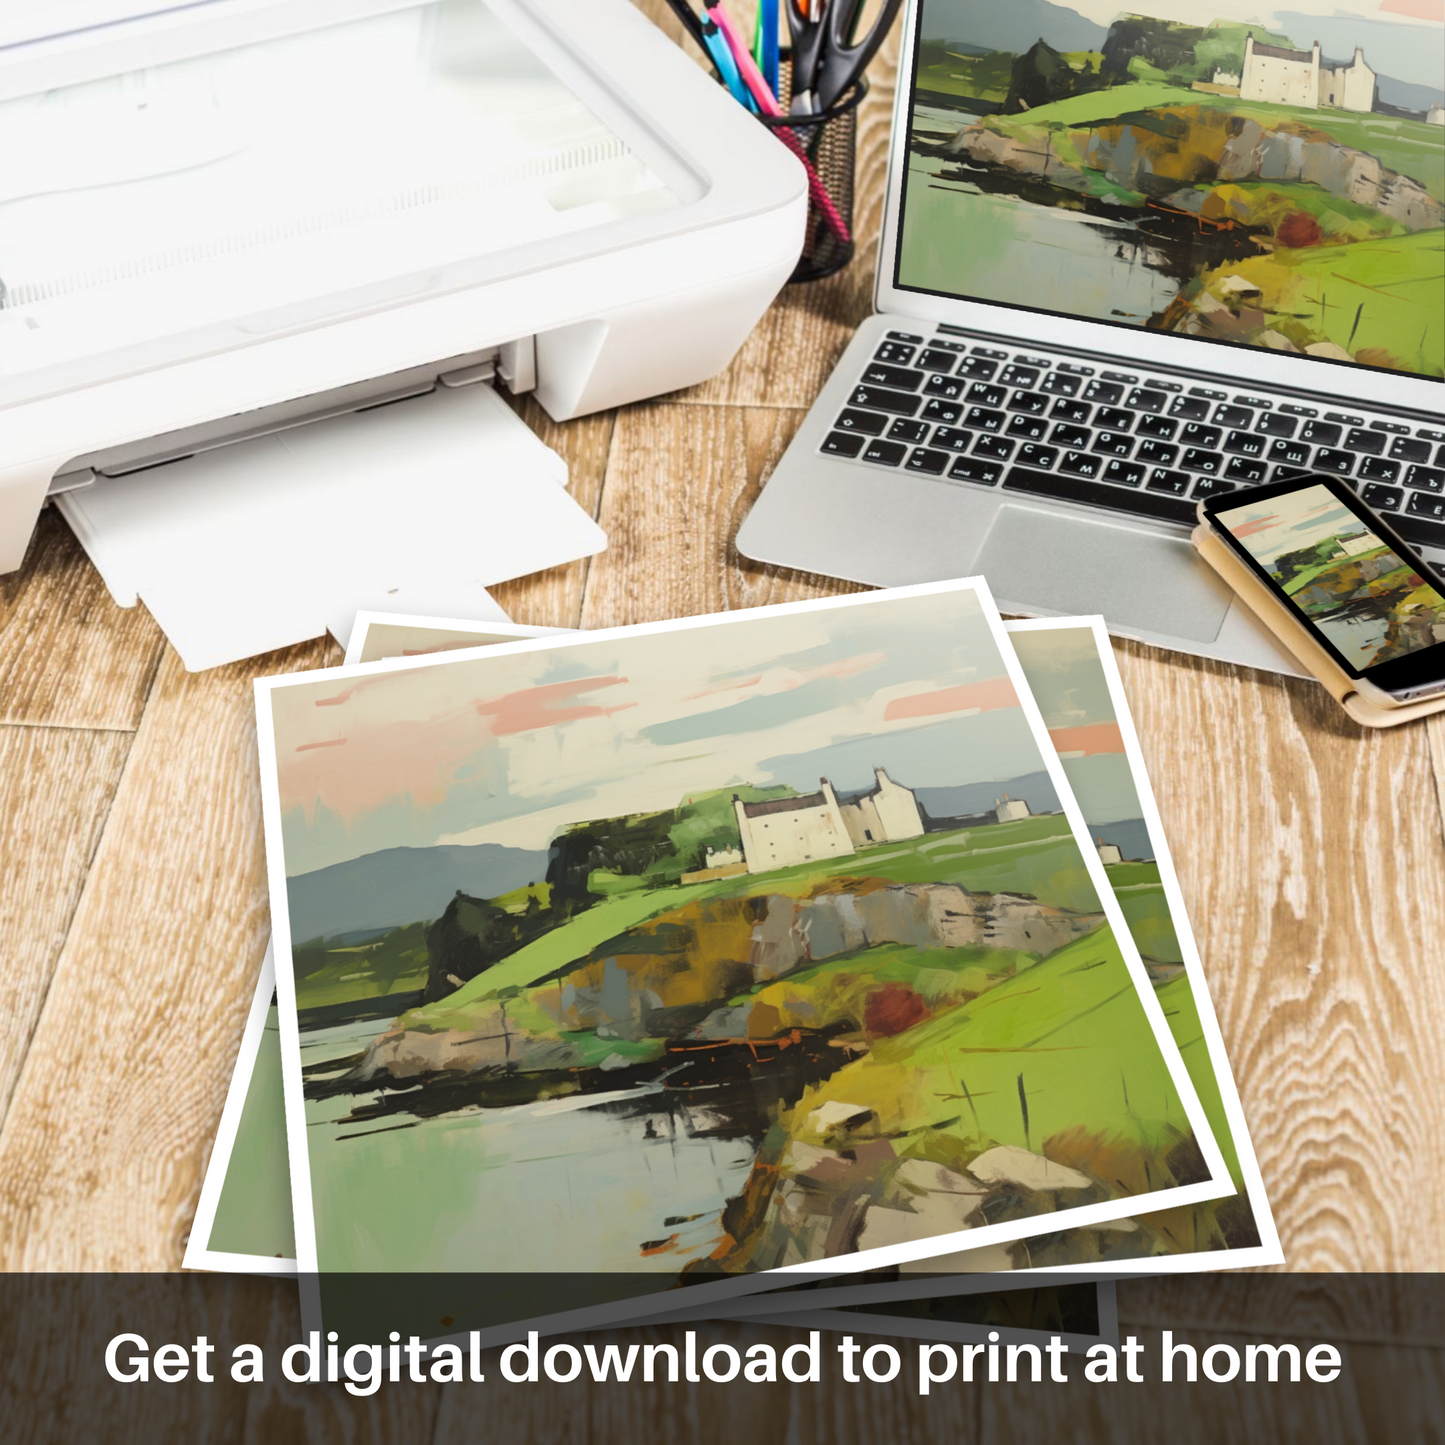 Downloadable and printable picture of Fort William